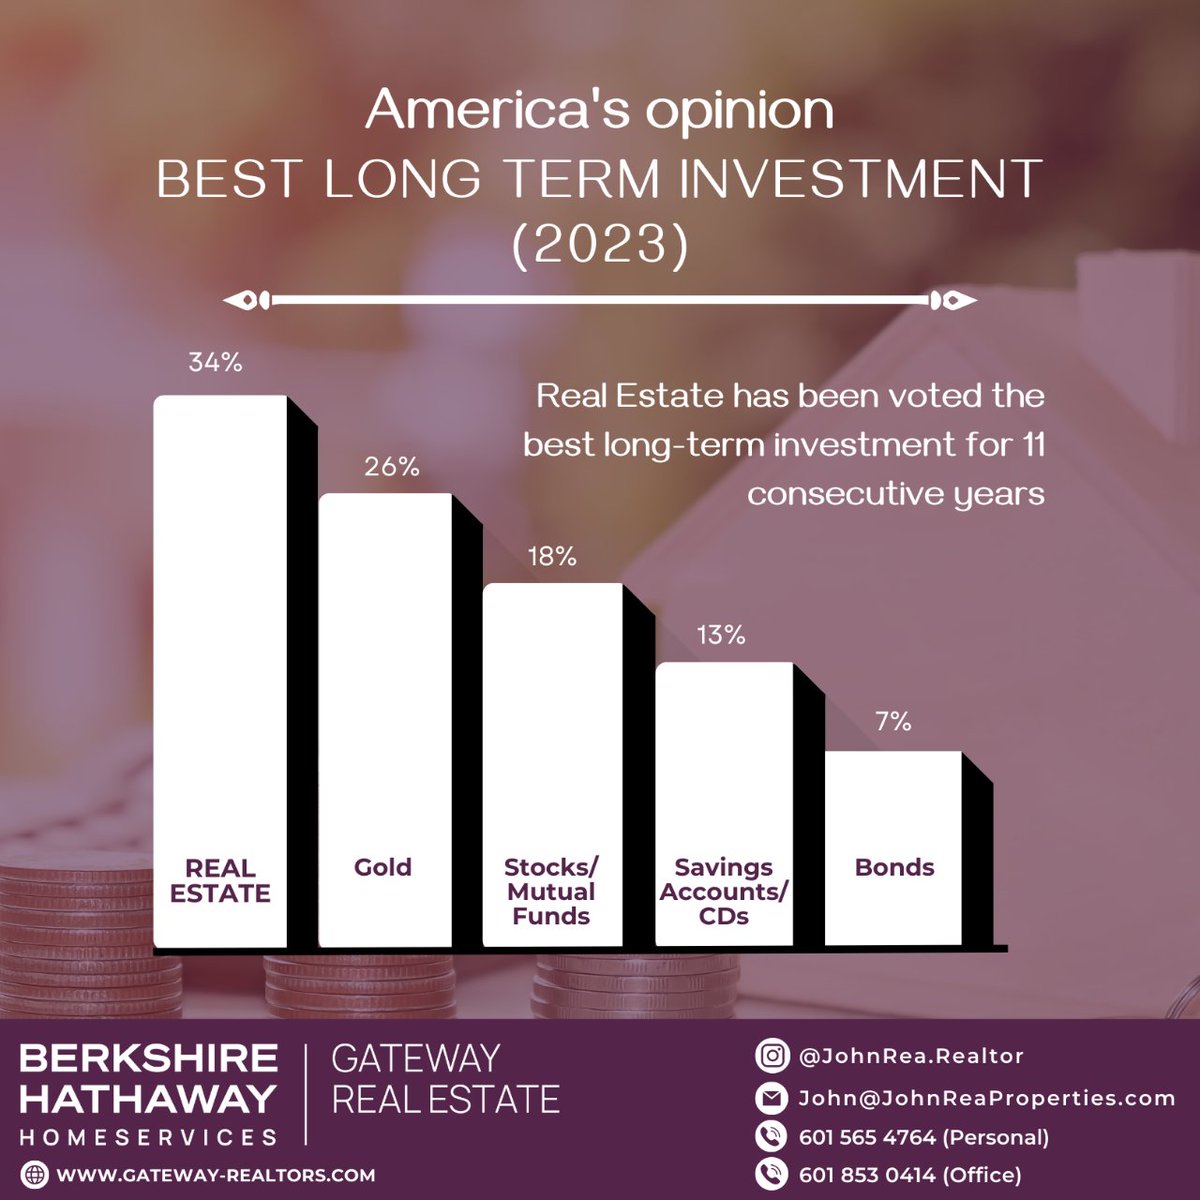 ✨ America's Voice: Resounding Confidence! 📈 In 2023, Real Estate retains its crown as the Ultimate Long-Term Investment for the 11th year running!💰 

#InvestmentRoyalty #RealEstateLegacy #WinningStreak #FinancialWisdom #PropertyProwess'